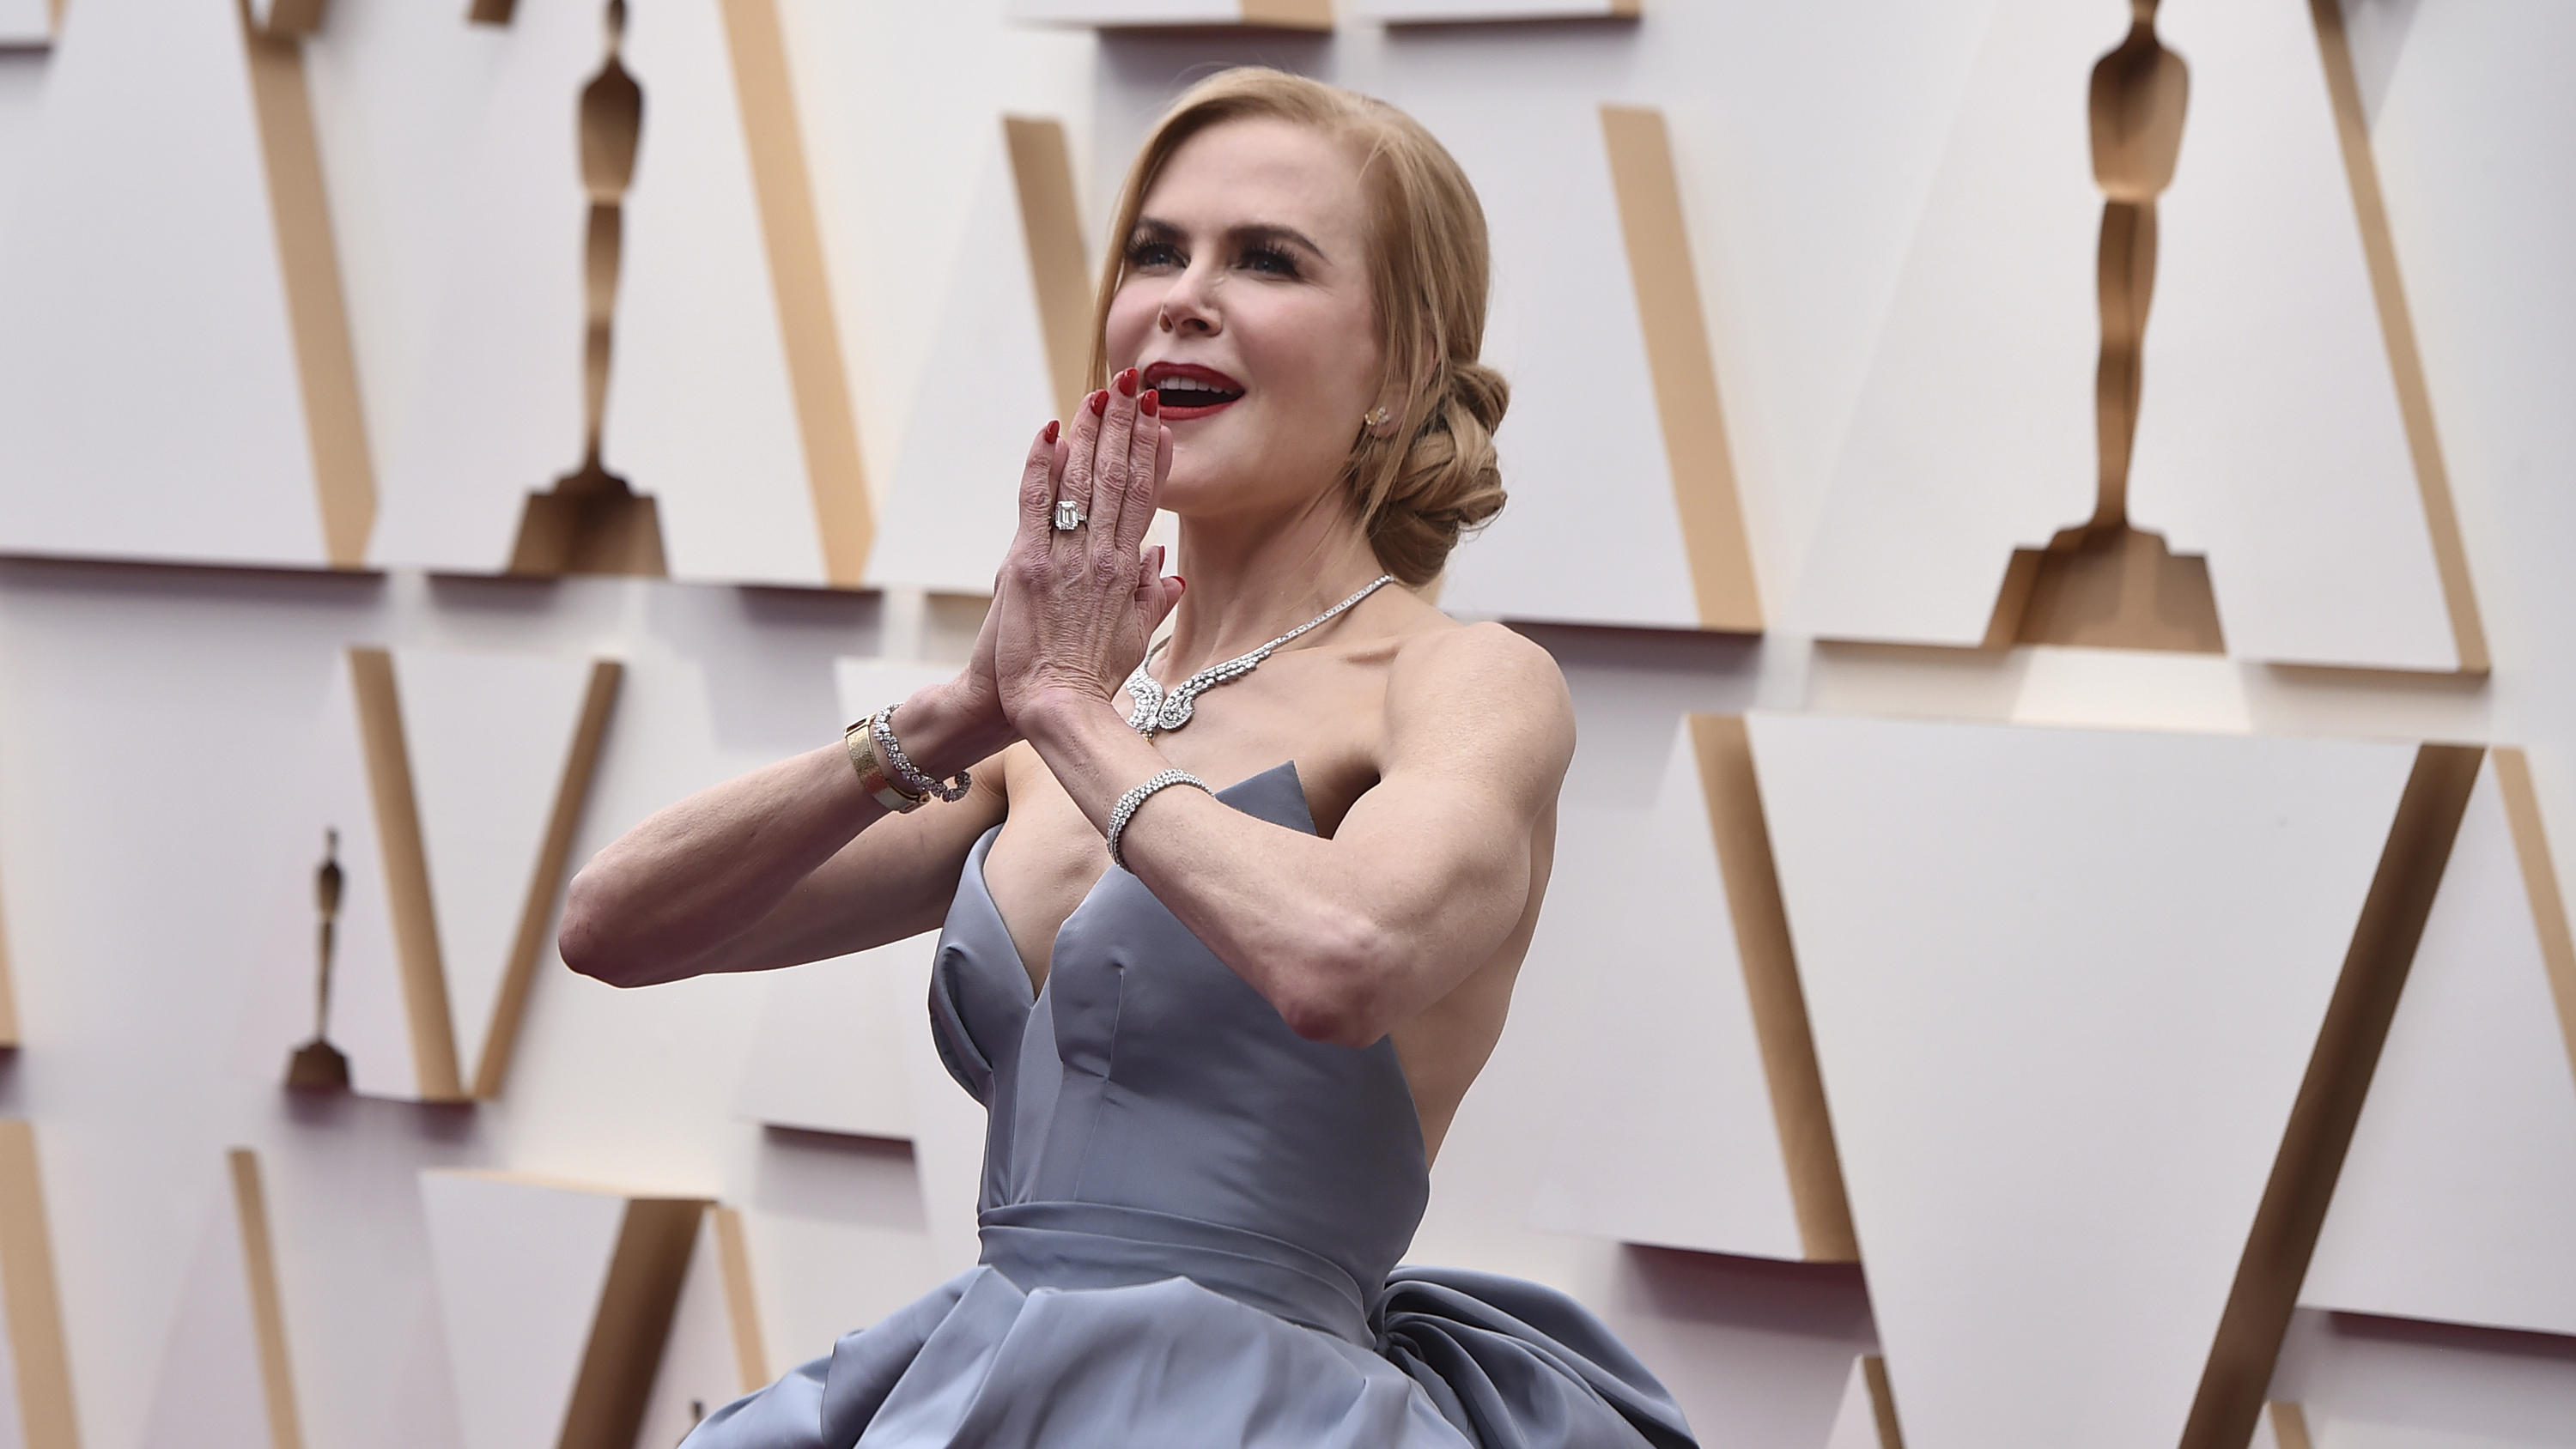 Nicole Kidman arrive at the Oscars on Sunday, March 27, 2022, at the Dolby Theatre in Los Angeles.